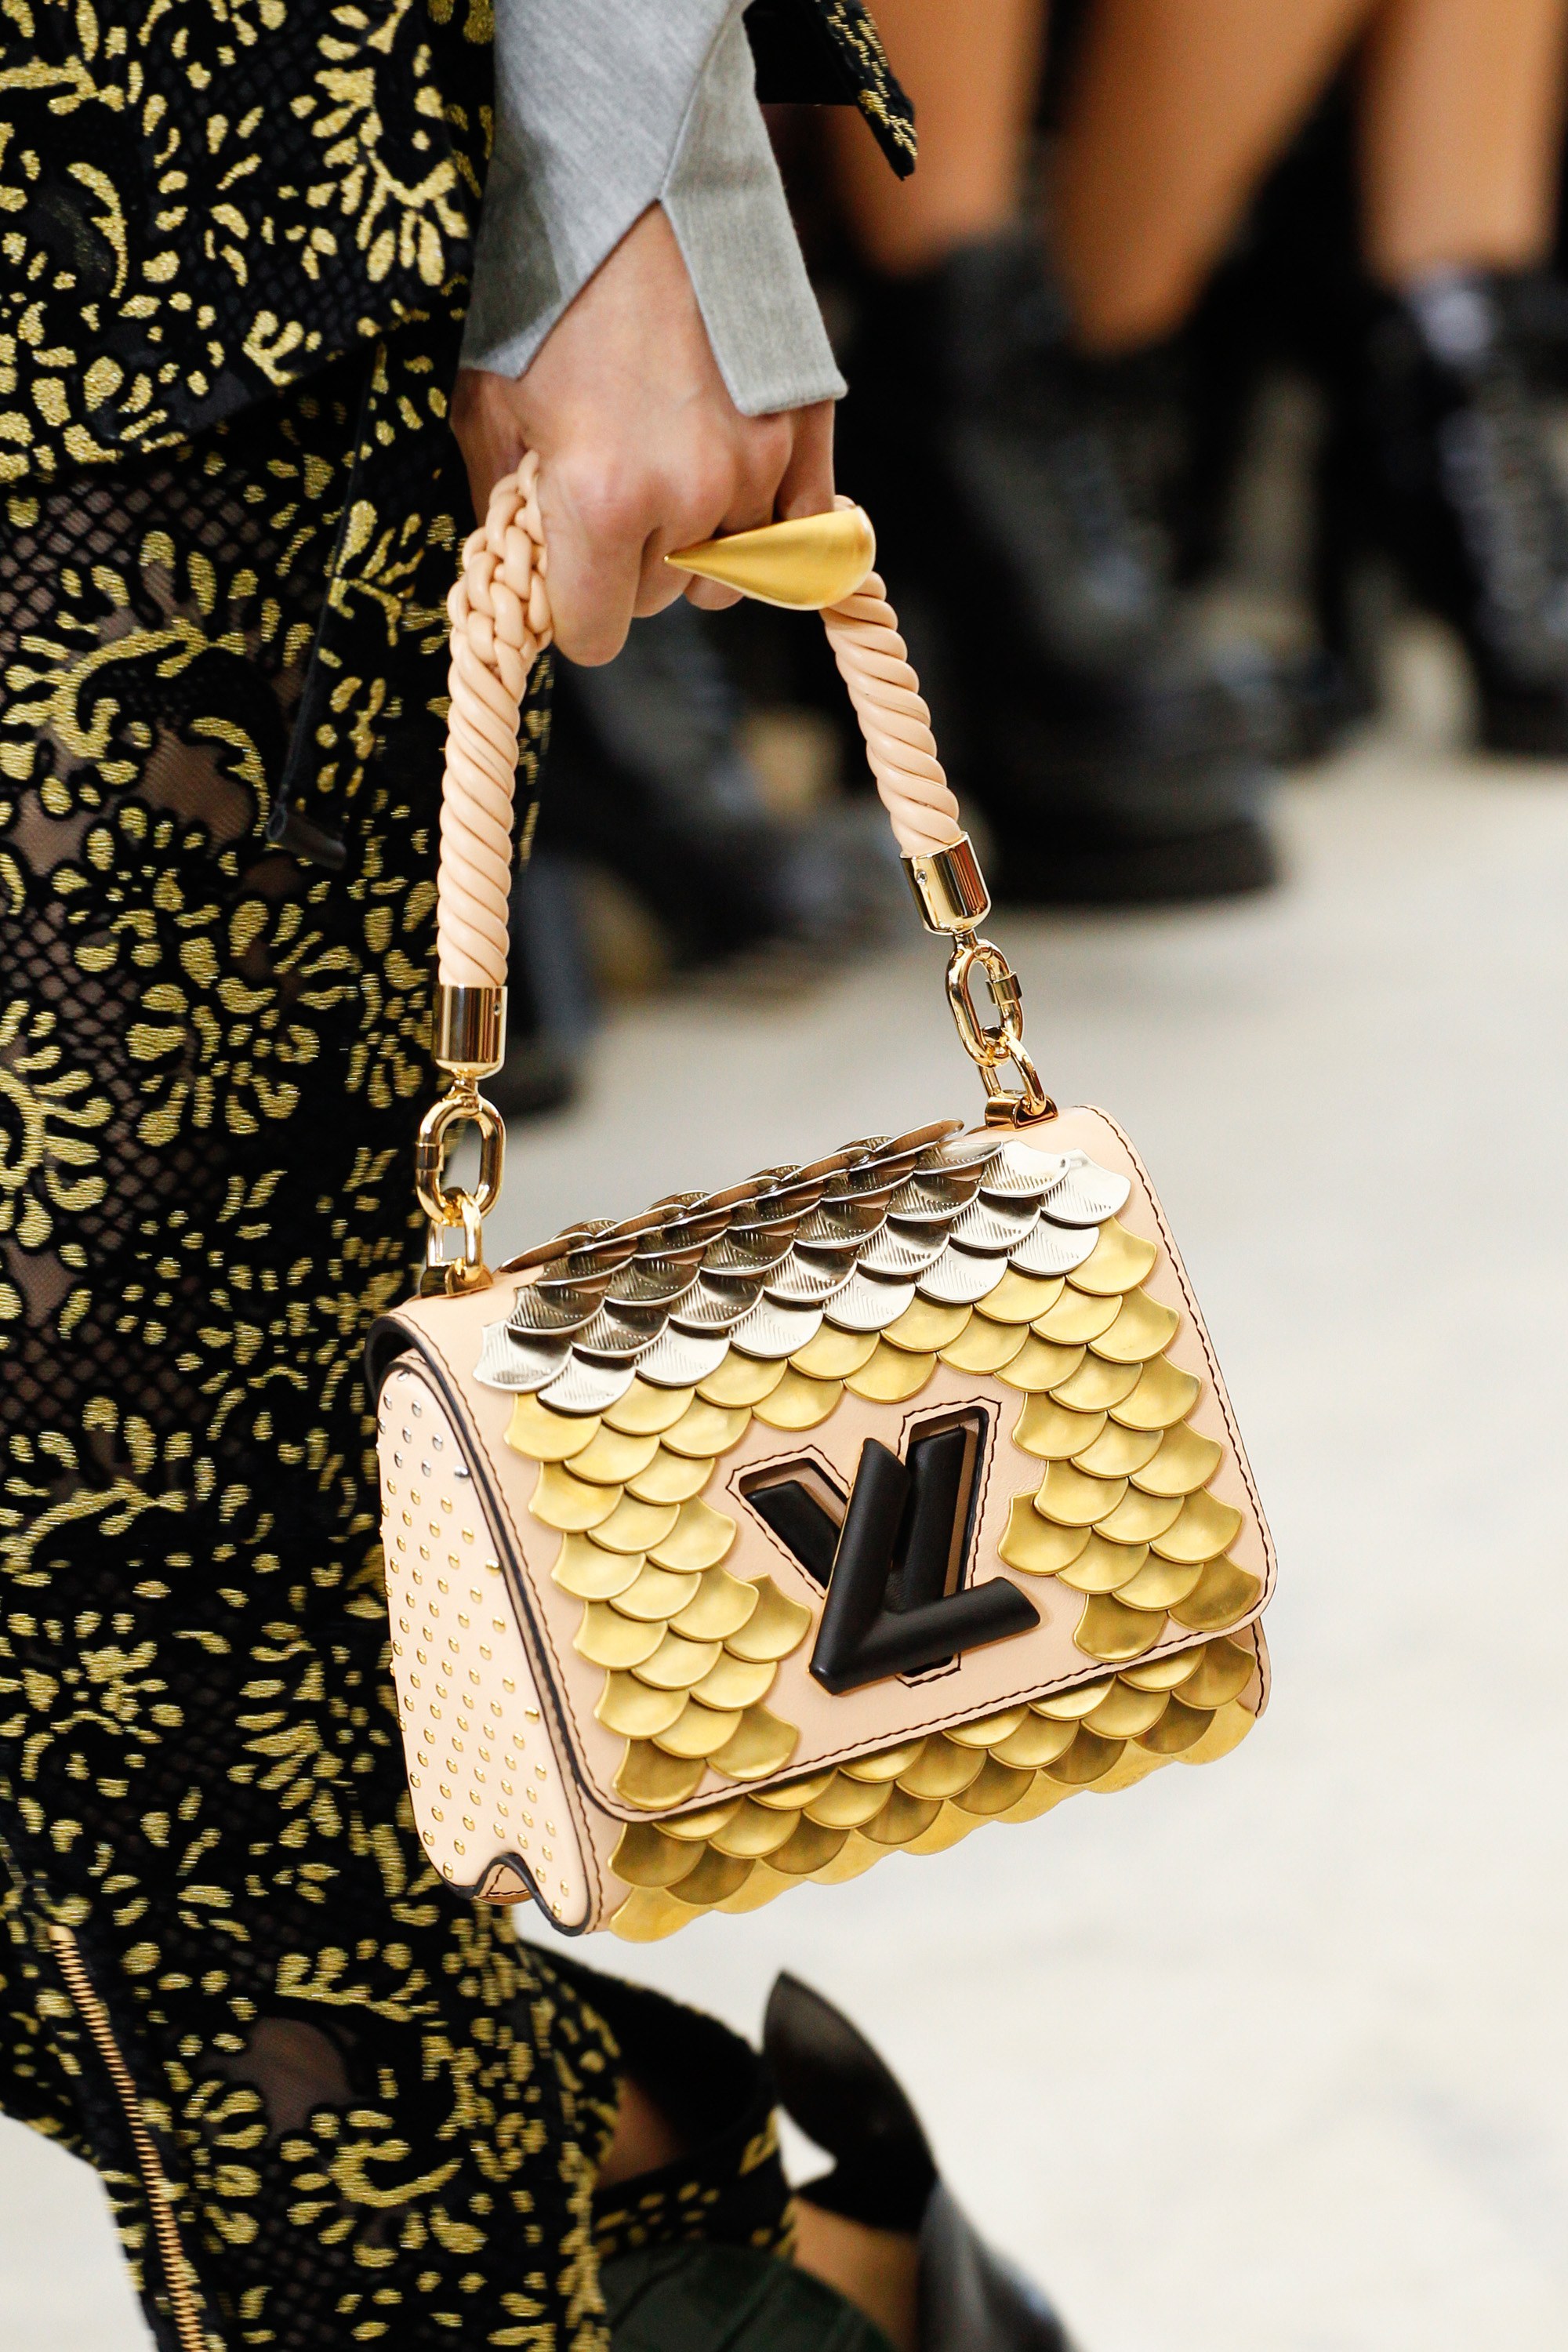 Louis Vuitton Spring/Summer 2017 Runway Bag Collection | Spotted Fashion